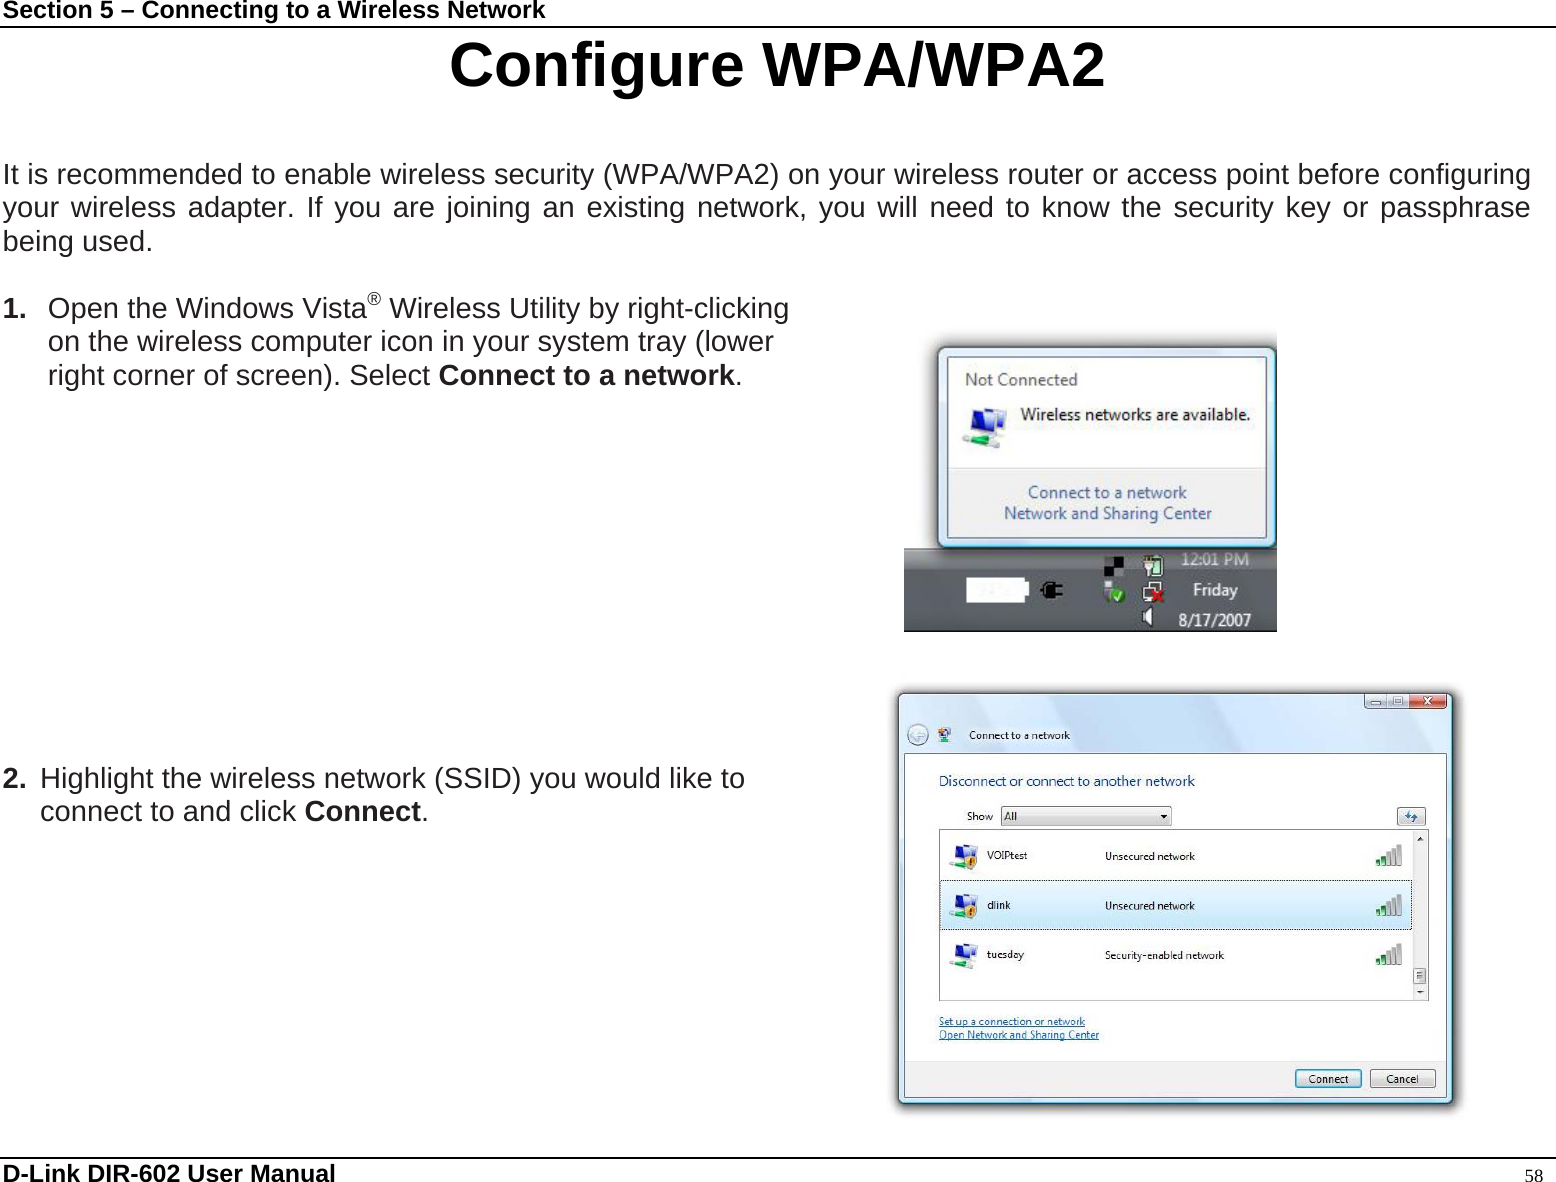 Section 5 – Connecting to a Wireless Network Configure WPA/WPA2  It is recommended to enable wireless security (WPA/WPA2) on your wireless router or access point before configuring your wireless adapter. If you are joining an existing network, you will need to know the security key or passphrase being used.  1.  Open the Windows Vista® Wireless Utility by right-clicking   on the wireless computer icon in your system tray (lower   right corner of screen). Select Connect to a network.             2.  Highlight the wireless network (SSID) you would like to connect to and click Connect.      D-Link DIR-602 User Manual                                                                                               58 